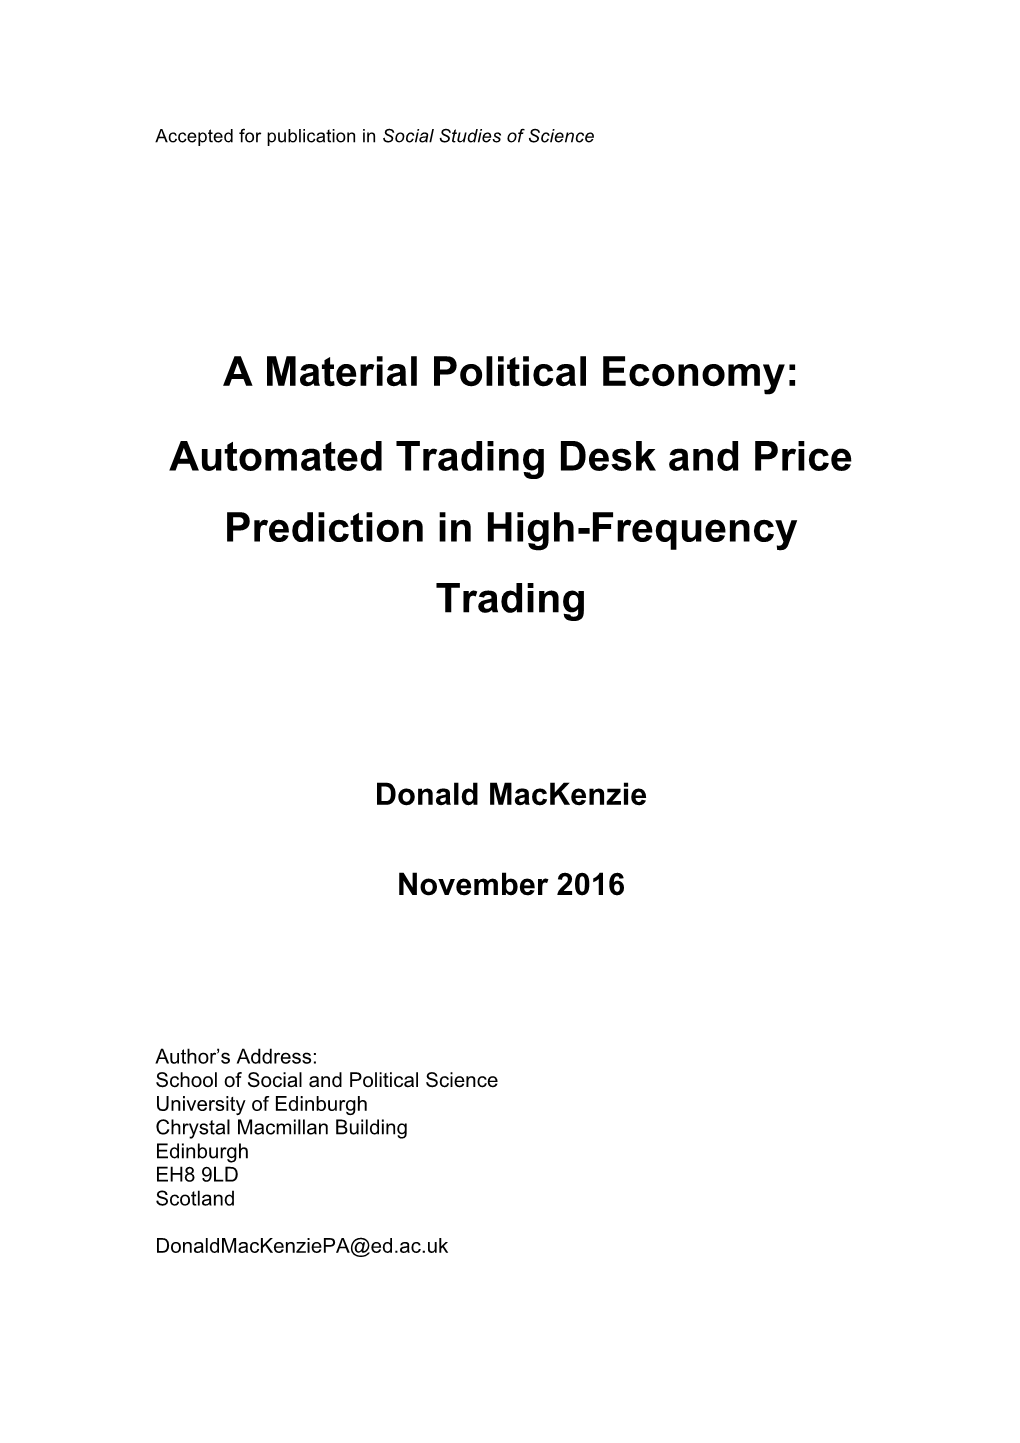 Automated Trading Desk and Price Prediction in High-Frequency Trading